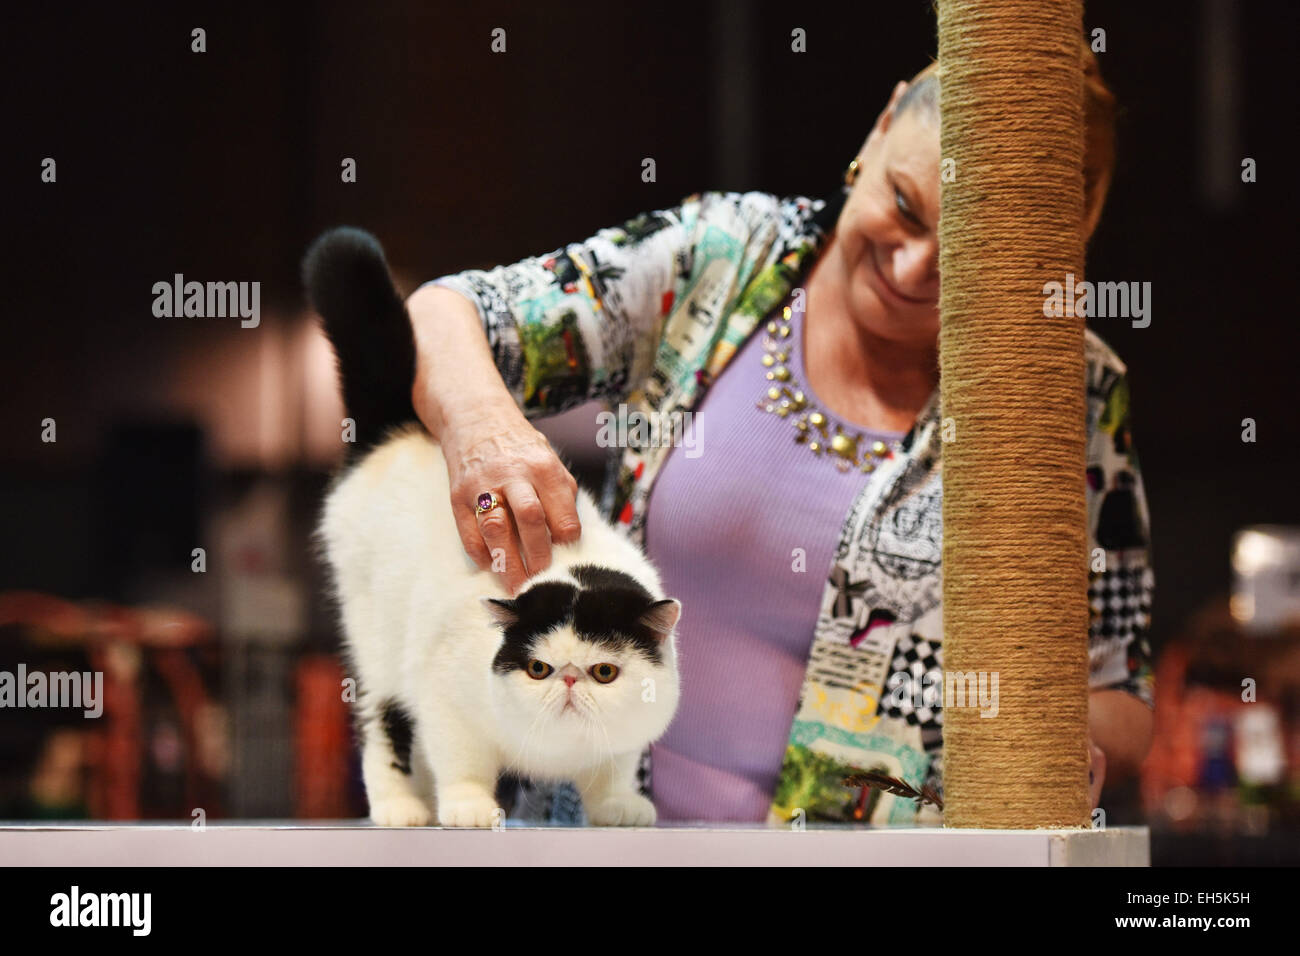 Bangkok, Thailand. 7th Mar, 2015. Judge observes a cat during the 2015 Bangkok International Cat Competition in Bangkok, Thailand, on March 7, 2015. More than 200 pedigree cats have been registered to participate in the event, which is hosted by the Cat Fanciers' Association and the Cat Fanciers' Club of Thailand. © Li Mangmang/Xinhua/Alamy Live News Stock Photo